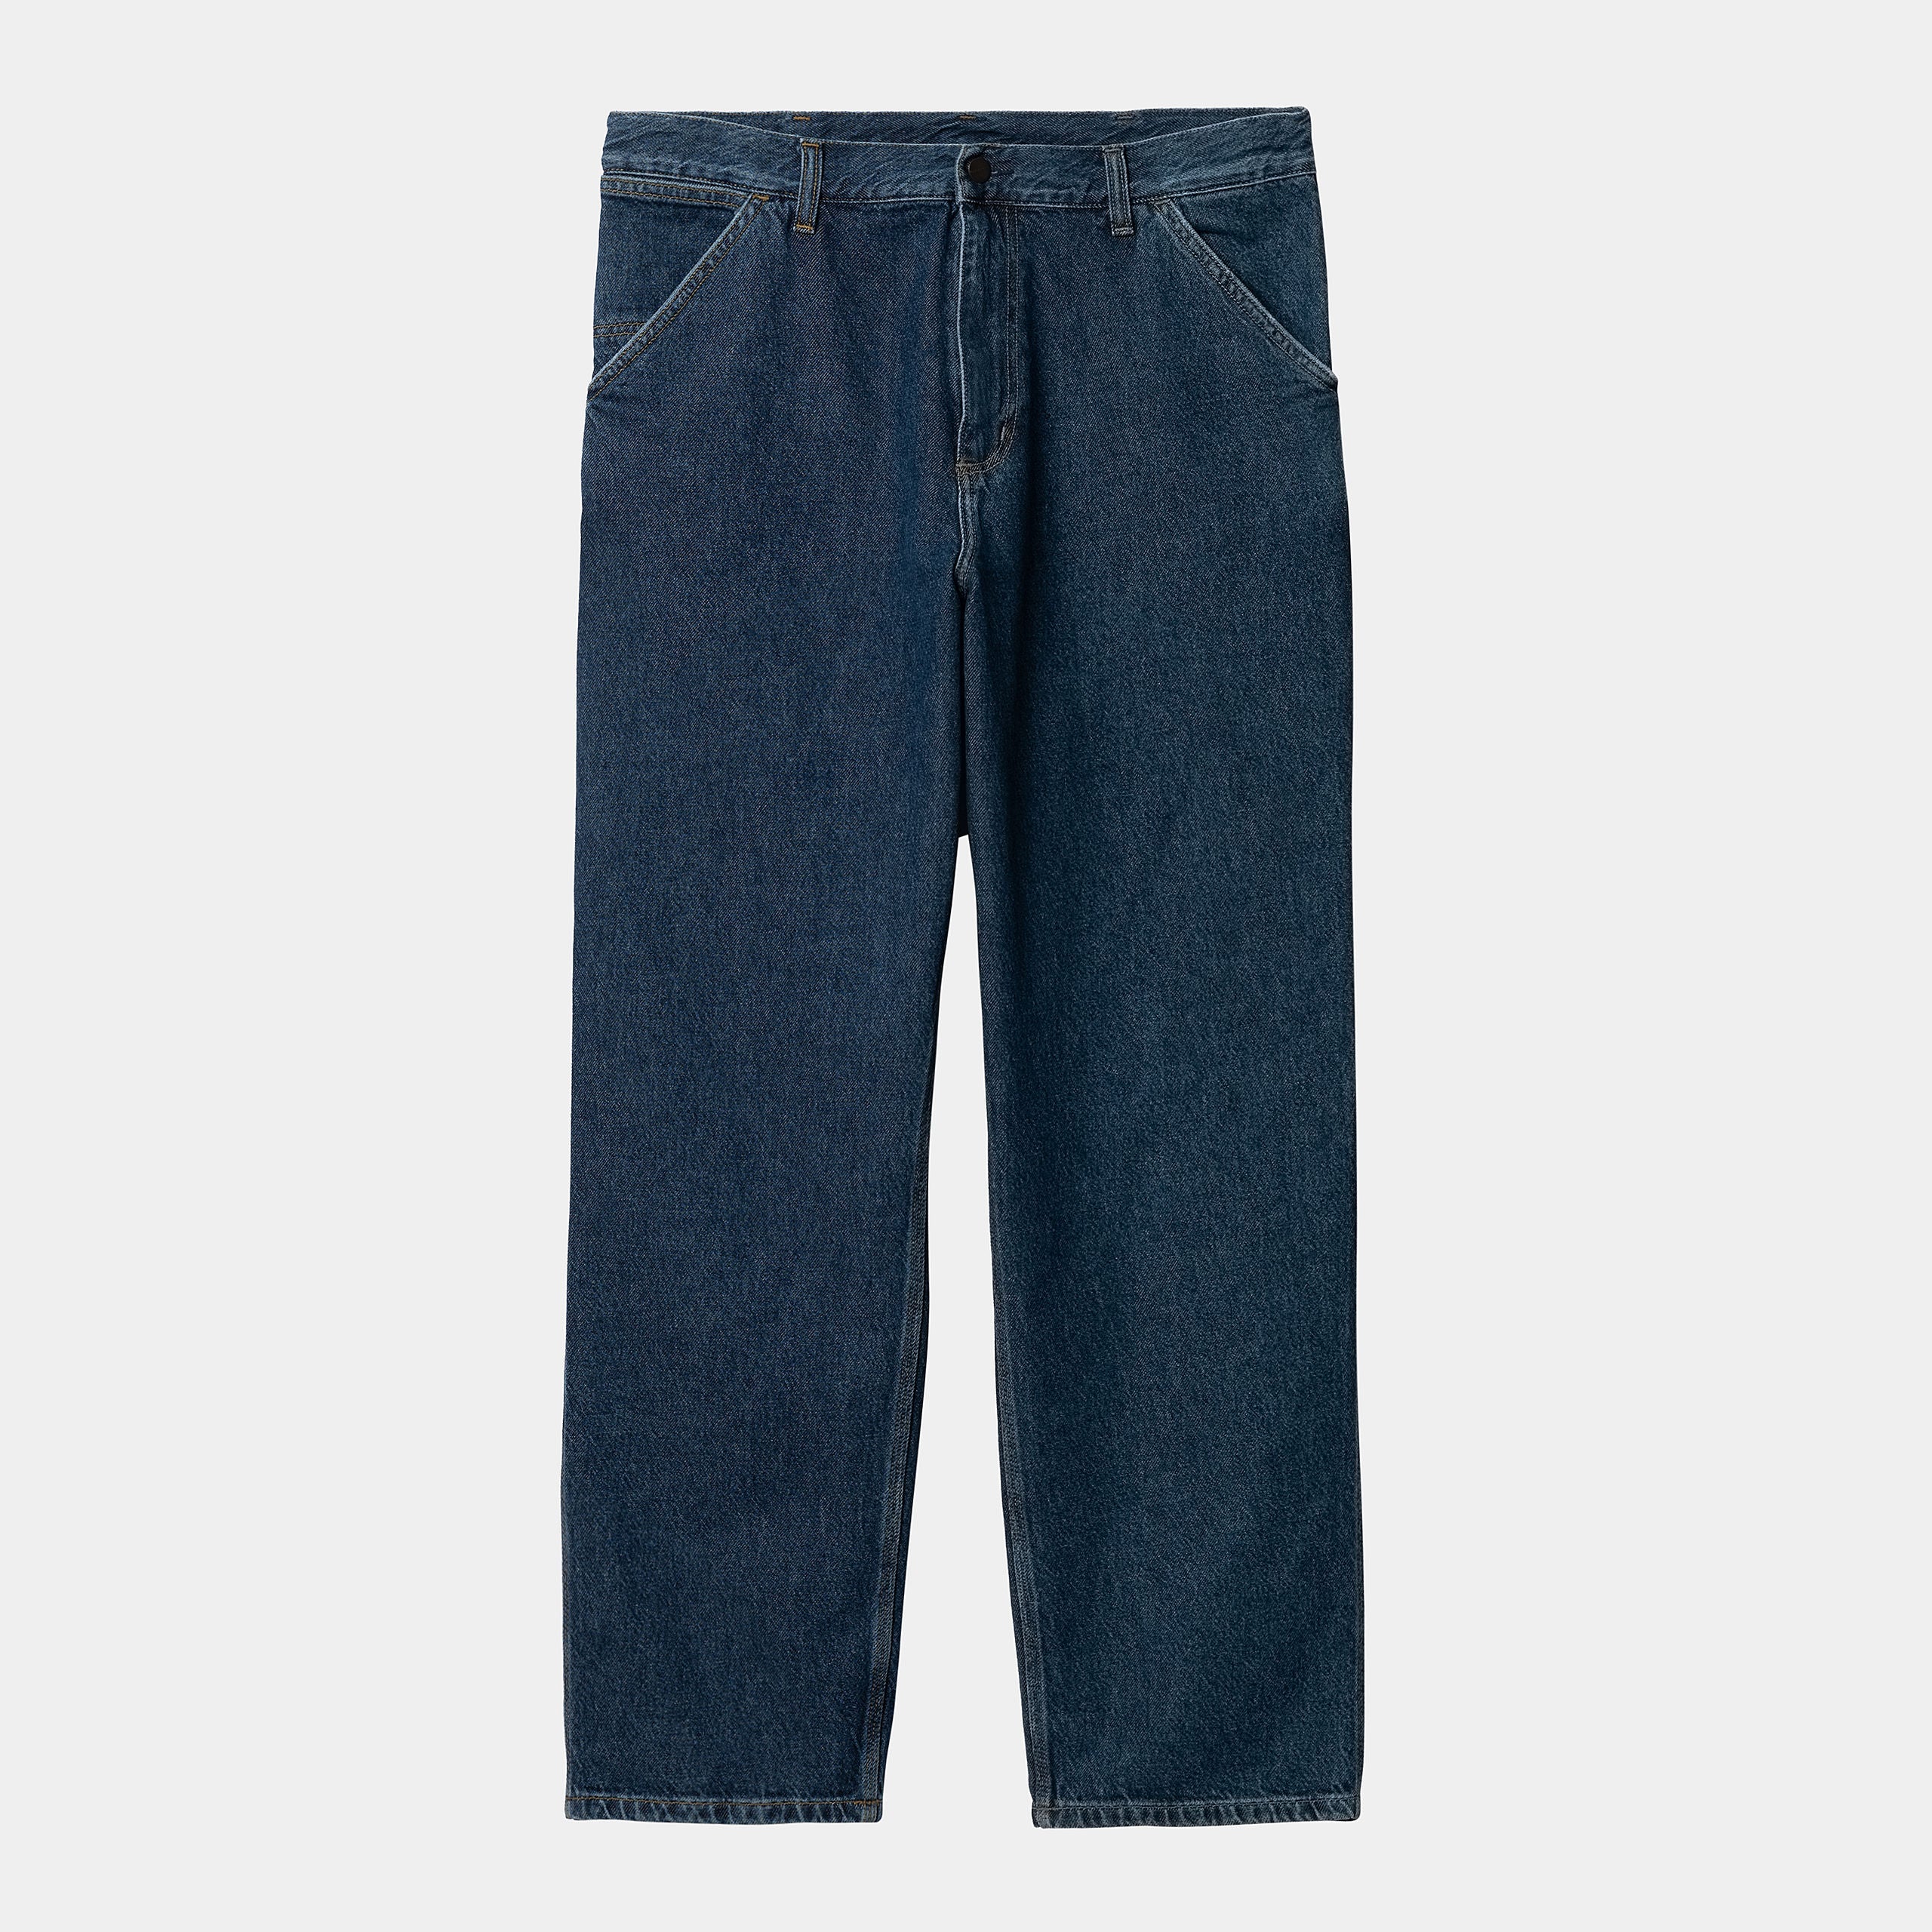 Carhartt WIP   Single Knee Pant 100% Cotton Smith Denim Stone Bleached and Stone Wash